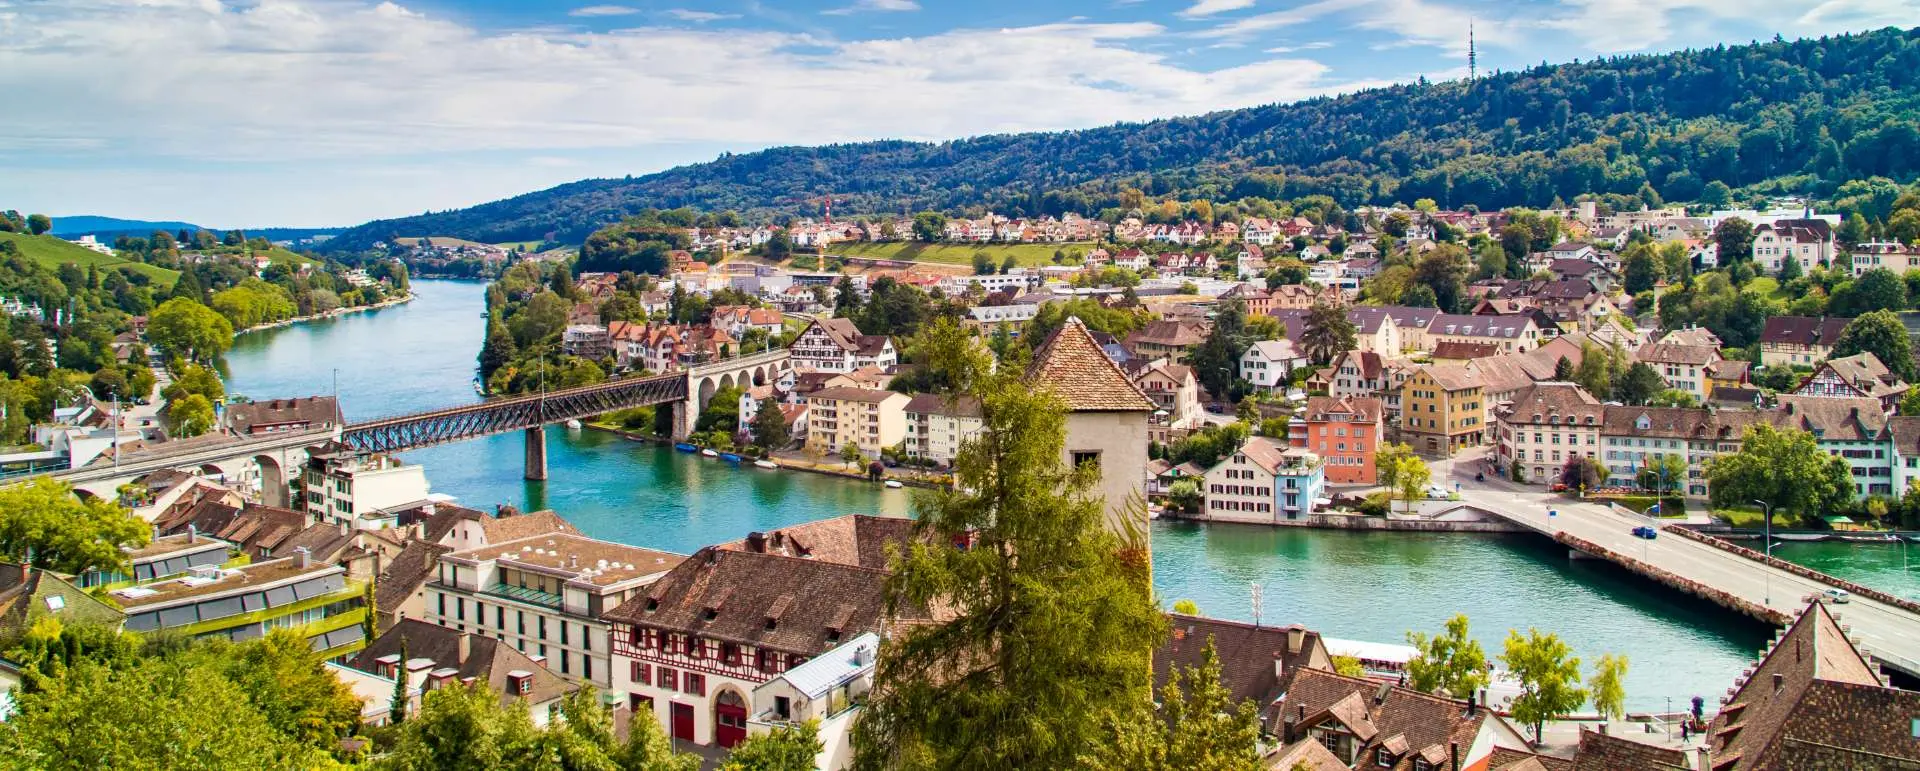 Schaffhausen - Luxury group accommodation for travelers